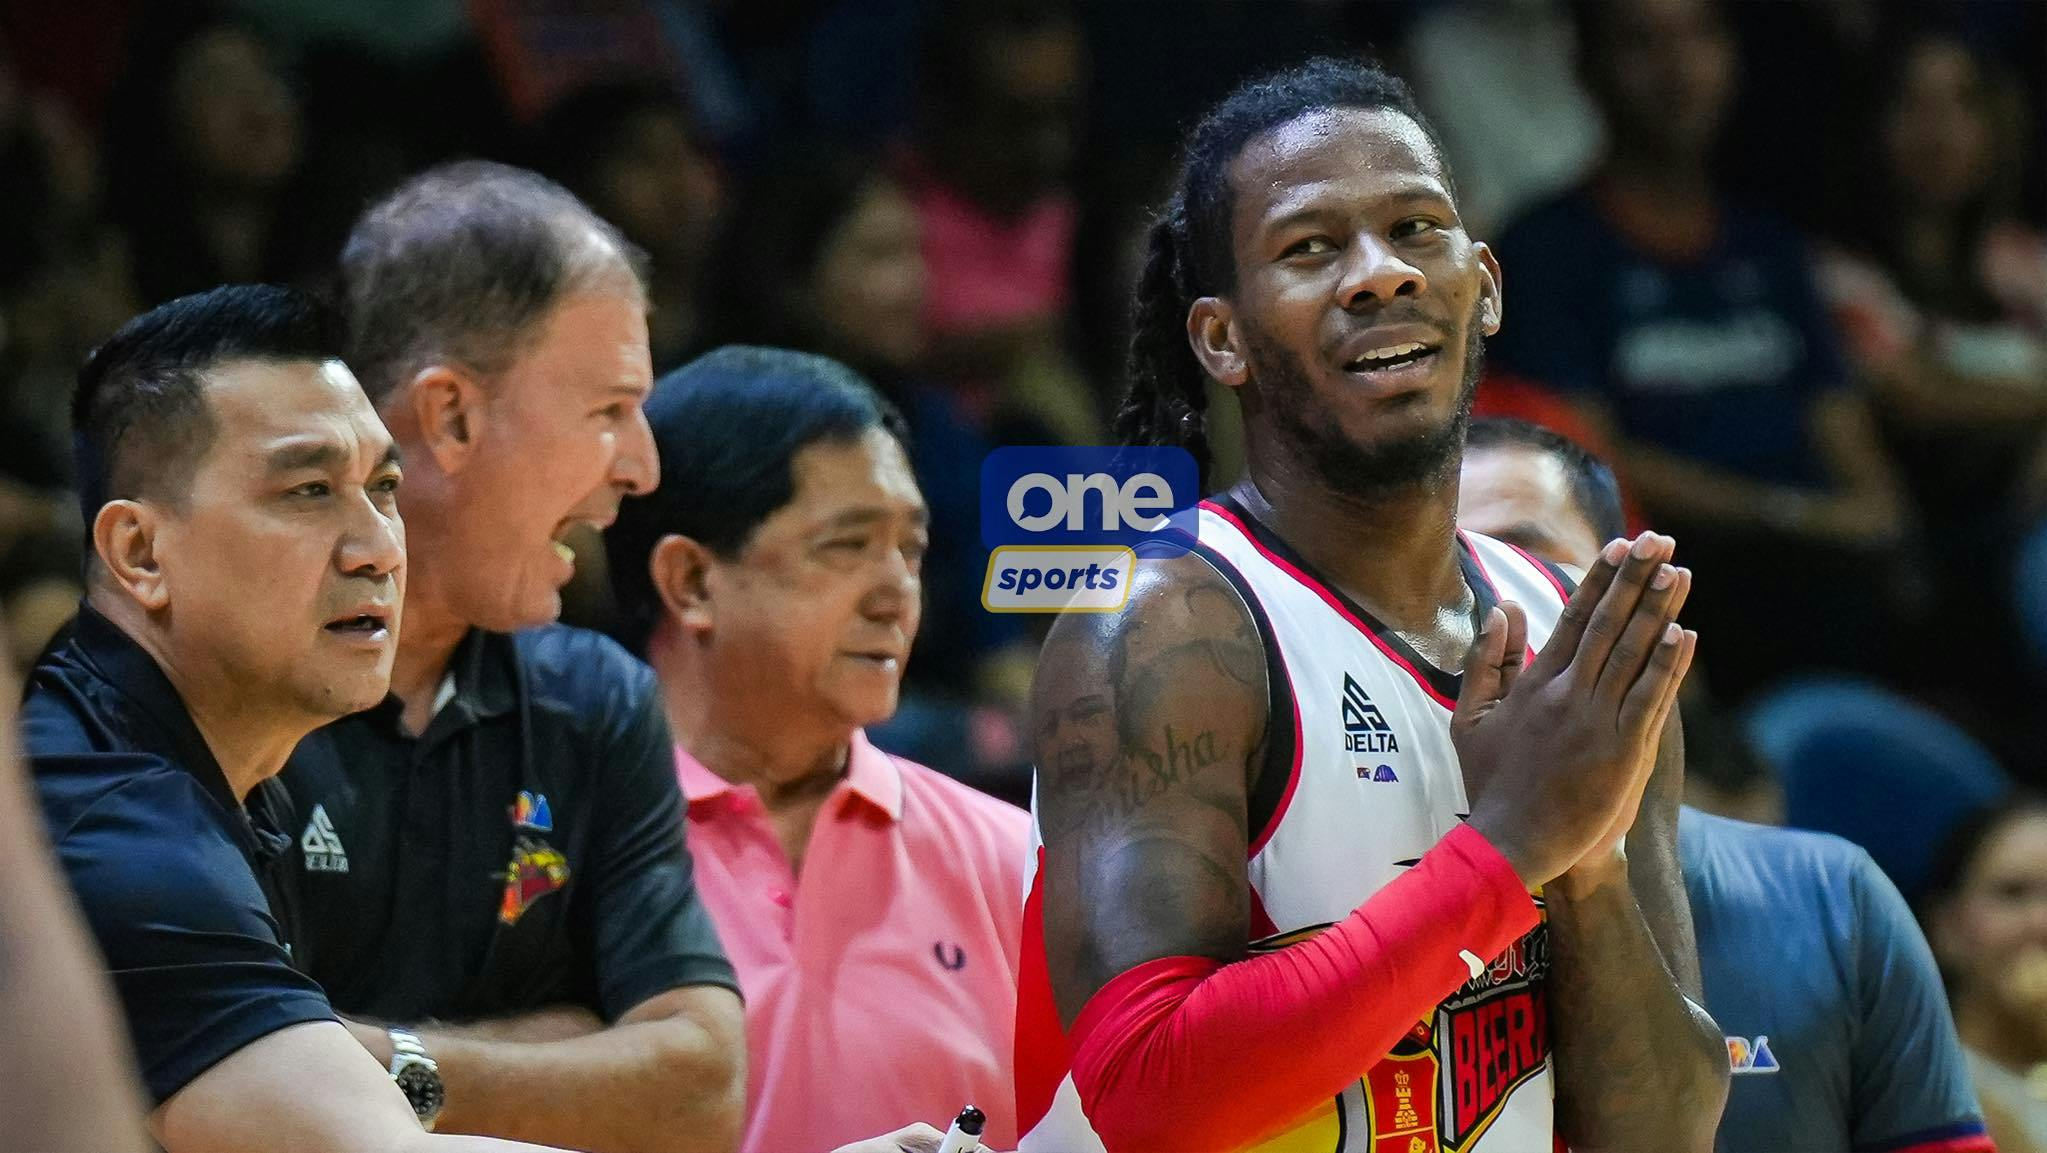 ‘I’M SO PROUD OF HIM’: CJ Perez tips hat off to new PBA champion and Finals MVP, Chris Newsome